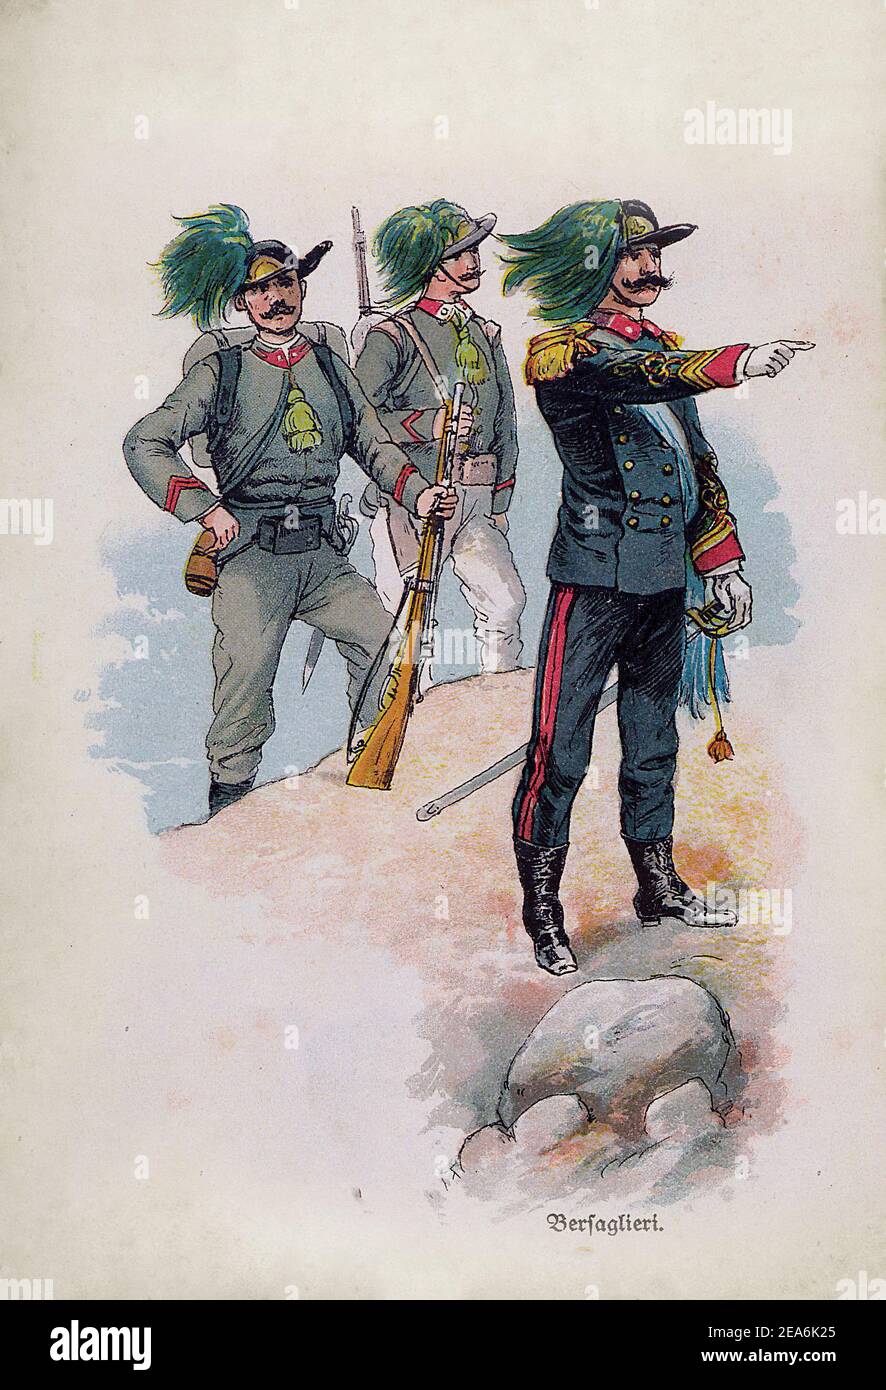 Royal Italian army before World War I. Bersaglieri. 1910s The Bersaglieri, singular Bersagliere, (sharpshooter) are a speciality of the Italian Army's Stock Photo